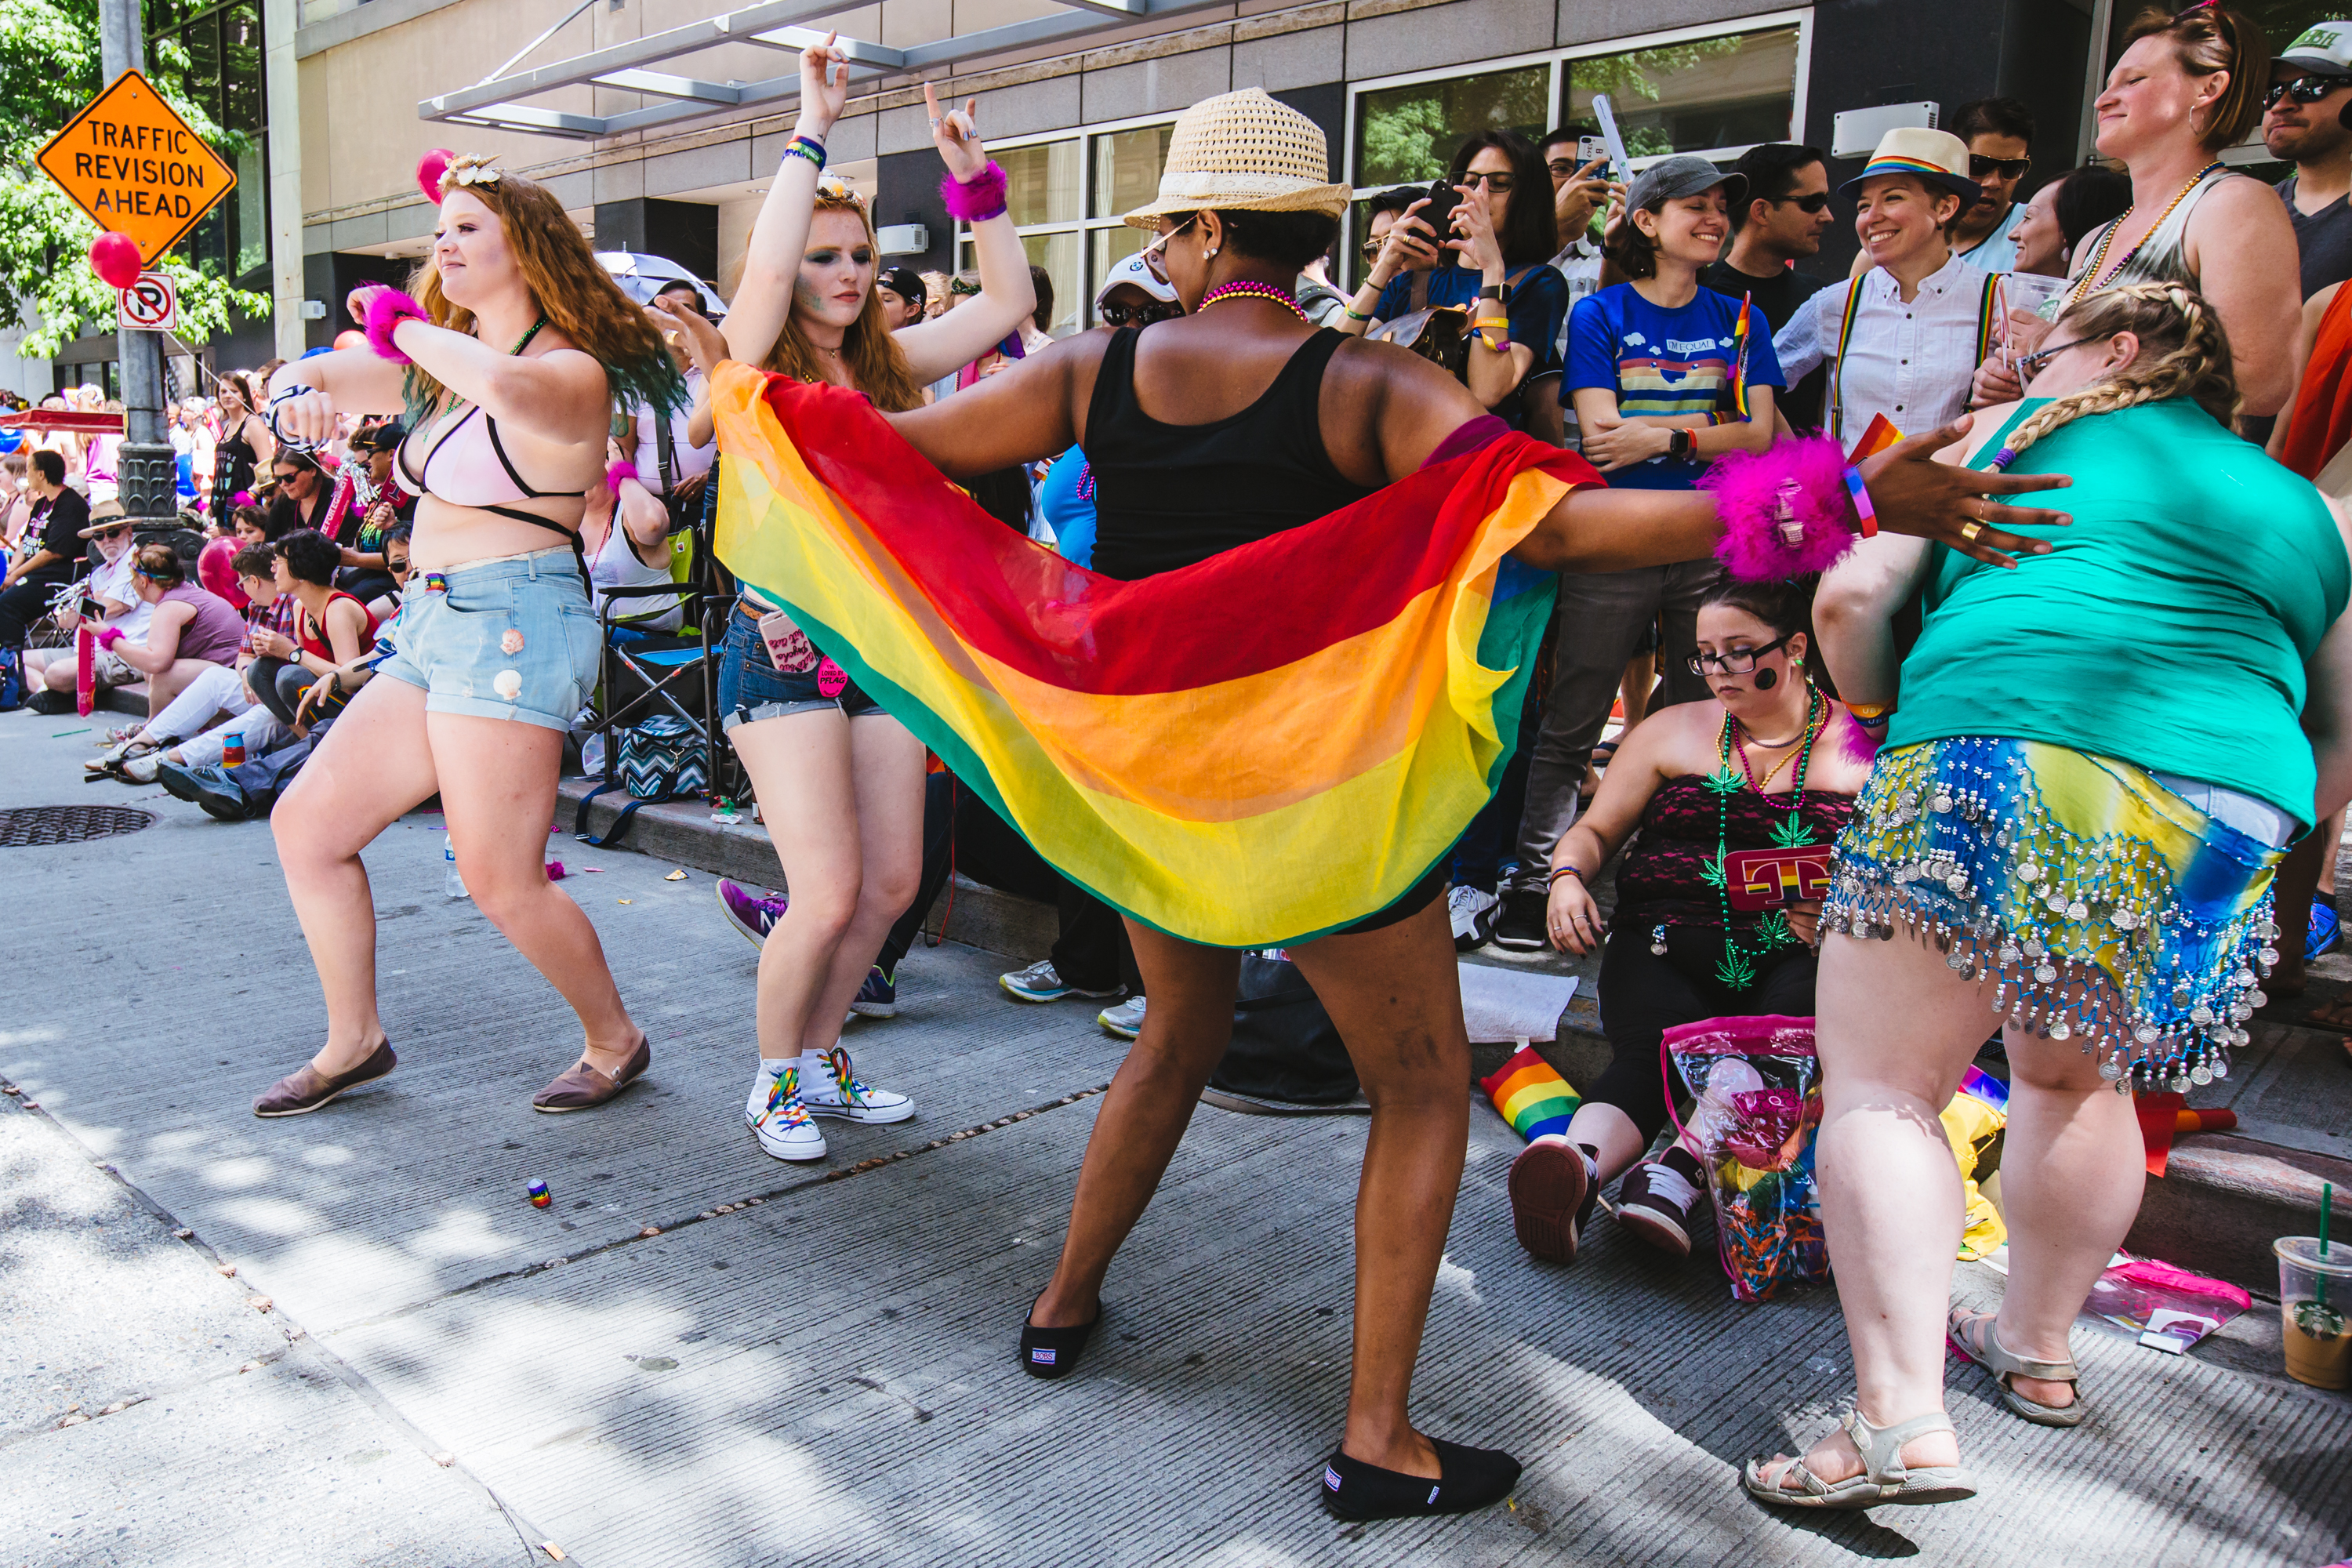 when is the gay pride parade in seattle wa in 2017